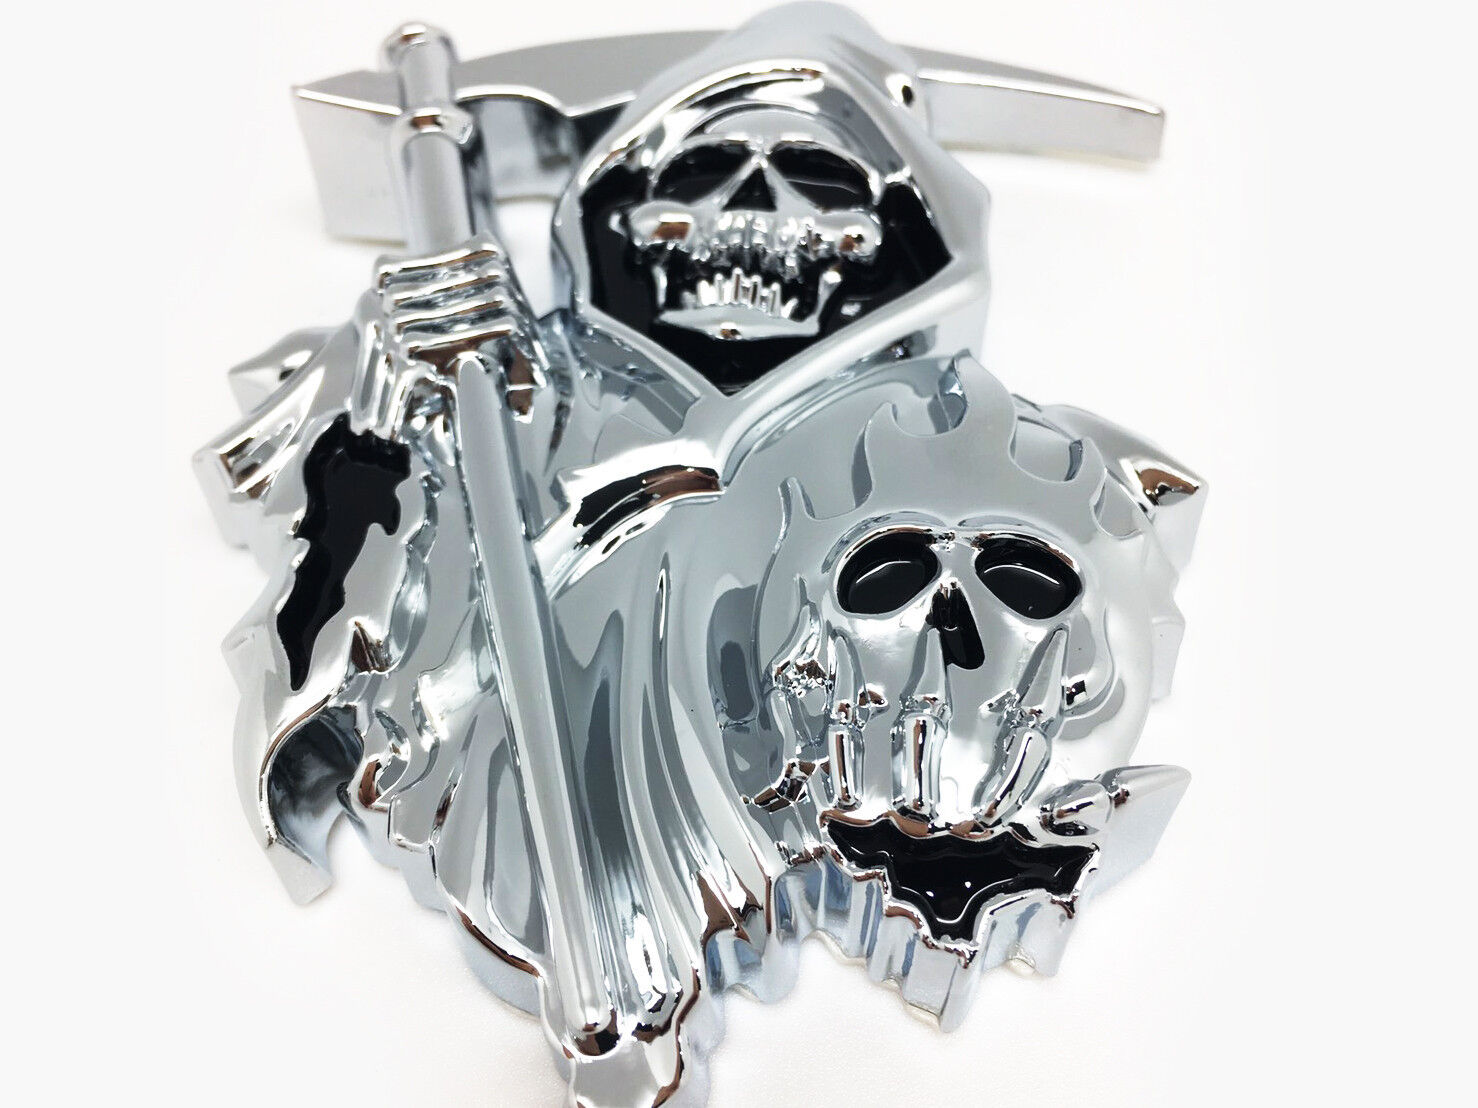  3D Grim Reaper Decal for Any Flat Surface - Chrome Car Decals -  Truck or Car Stickers That Feature Custom Chrome Decal of Grim Reaper Skull  : Automotive